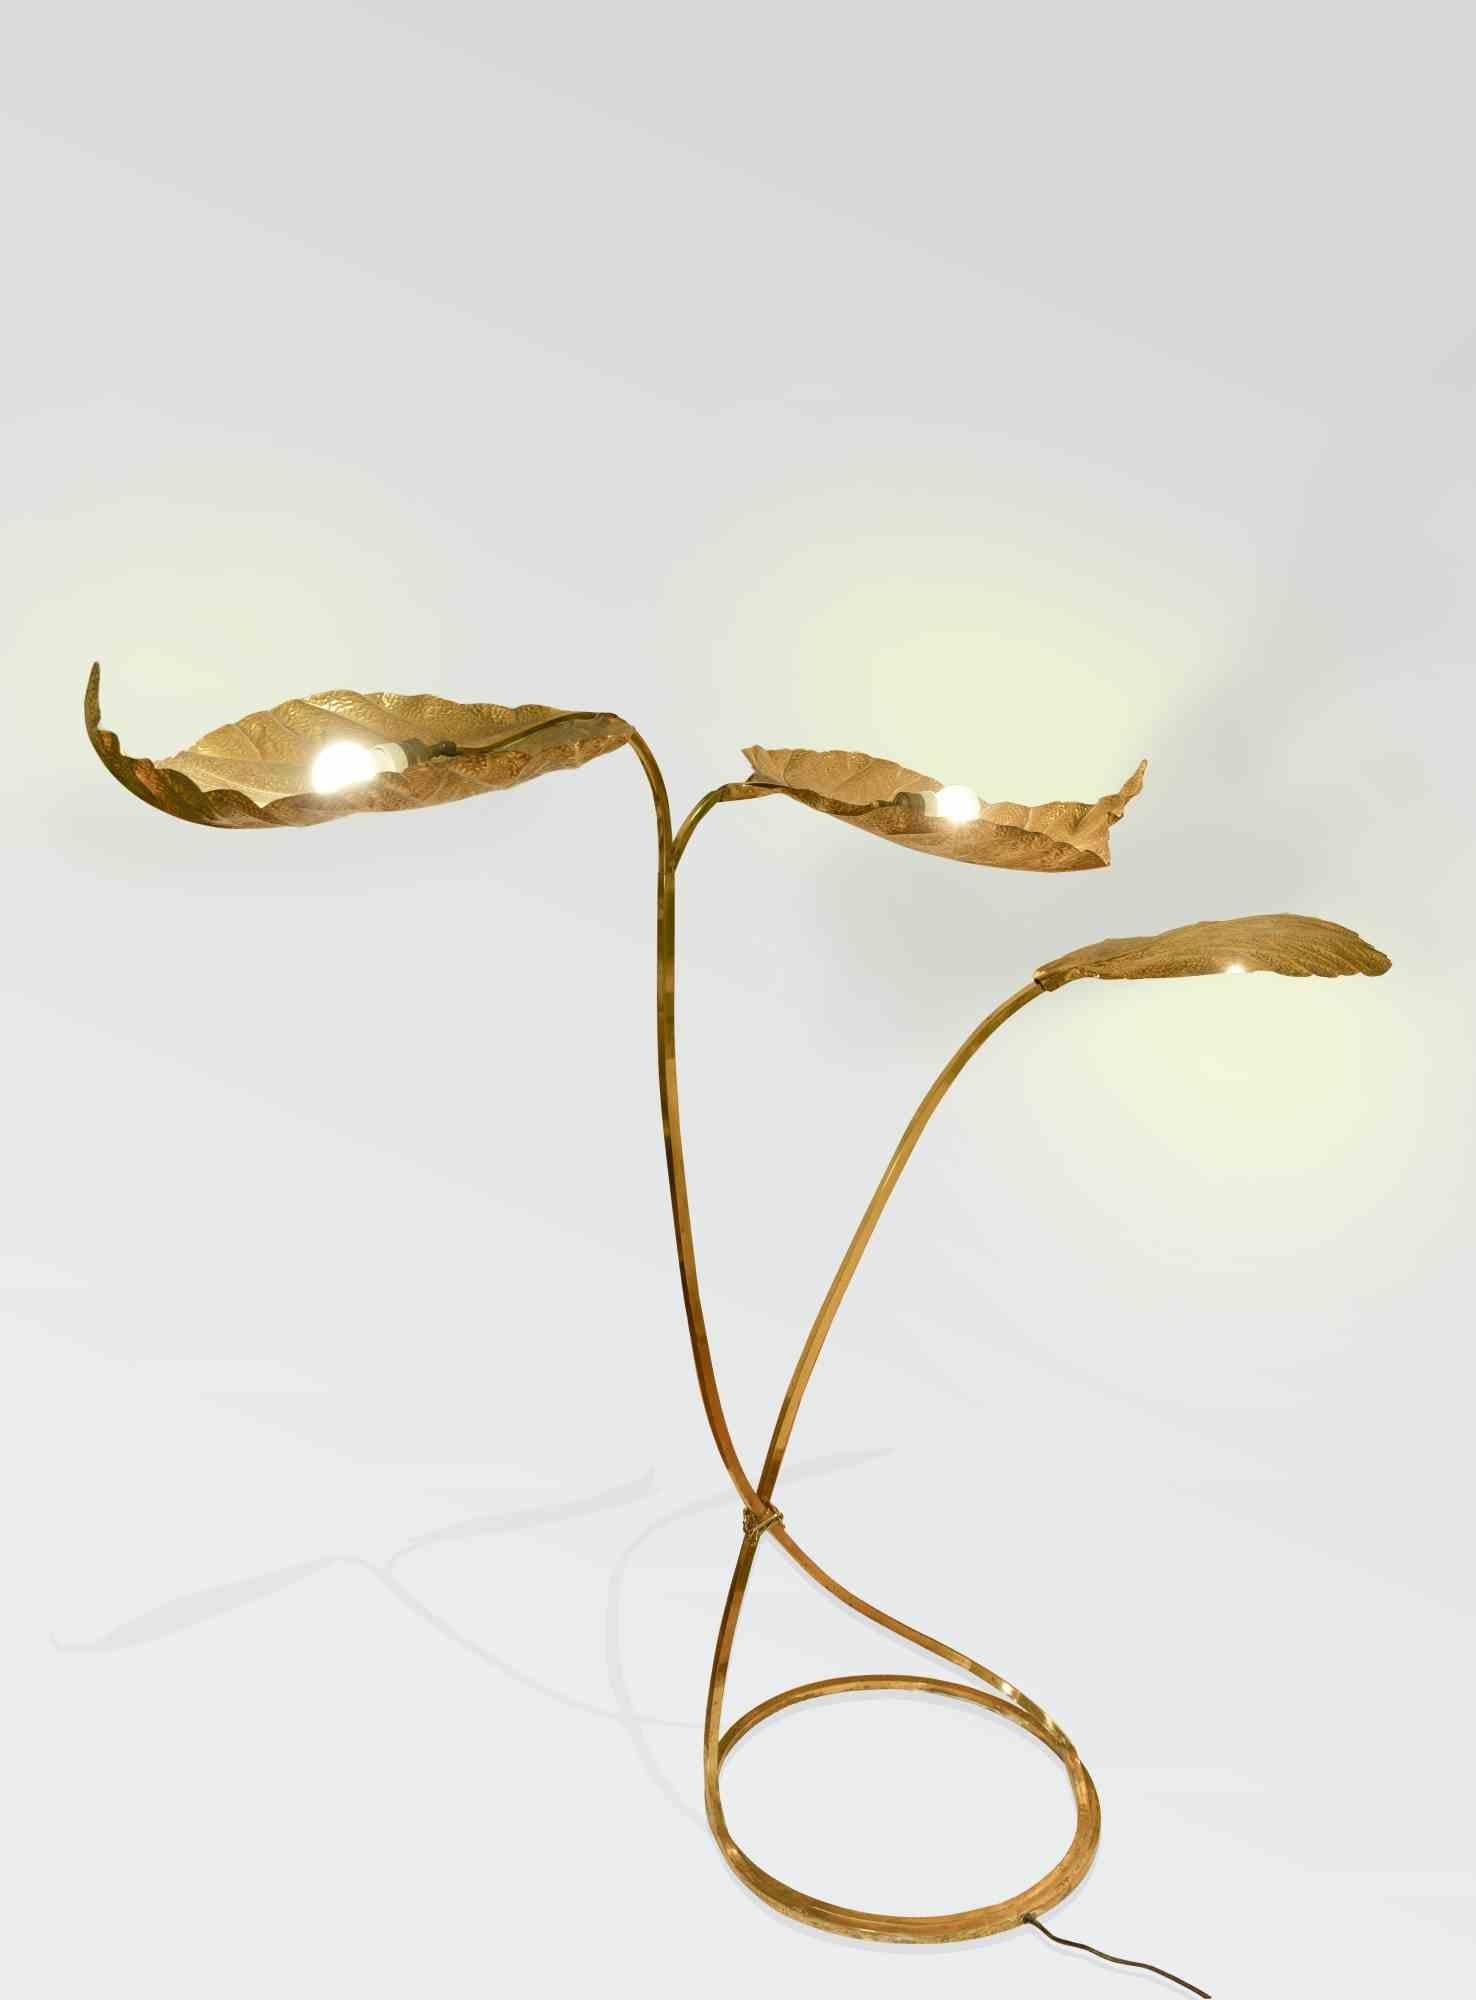 Vintage Floor Lamp Three Leaves by Carlo Giorgi for Bottega Gadda, Italy 1970s.

The entire structure is in brass. Each leaf can be adjusted increasing or decreasing the length.

184 x 180 x 50 cm.

Rare and in very good condition. 



 